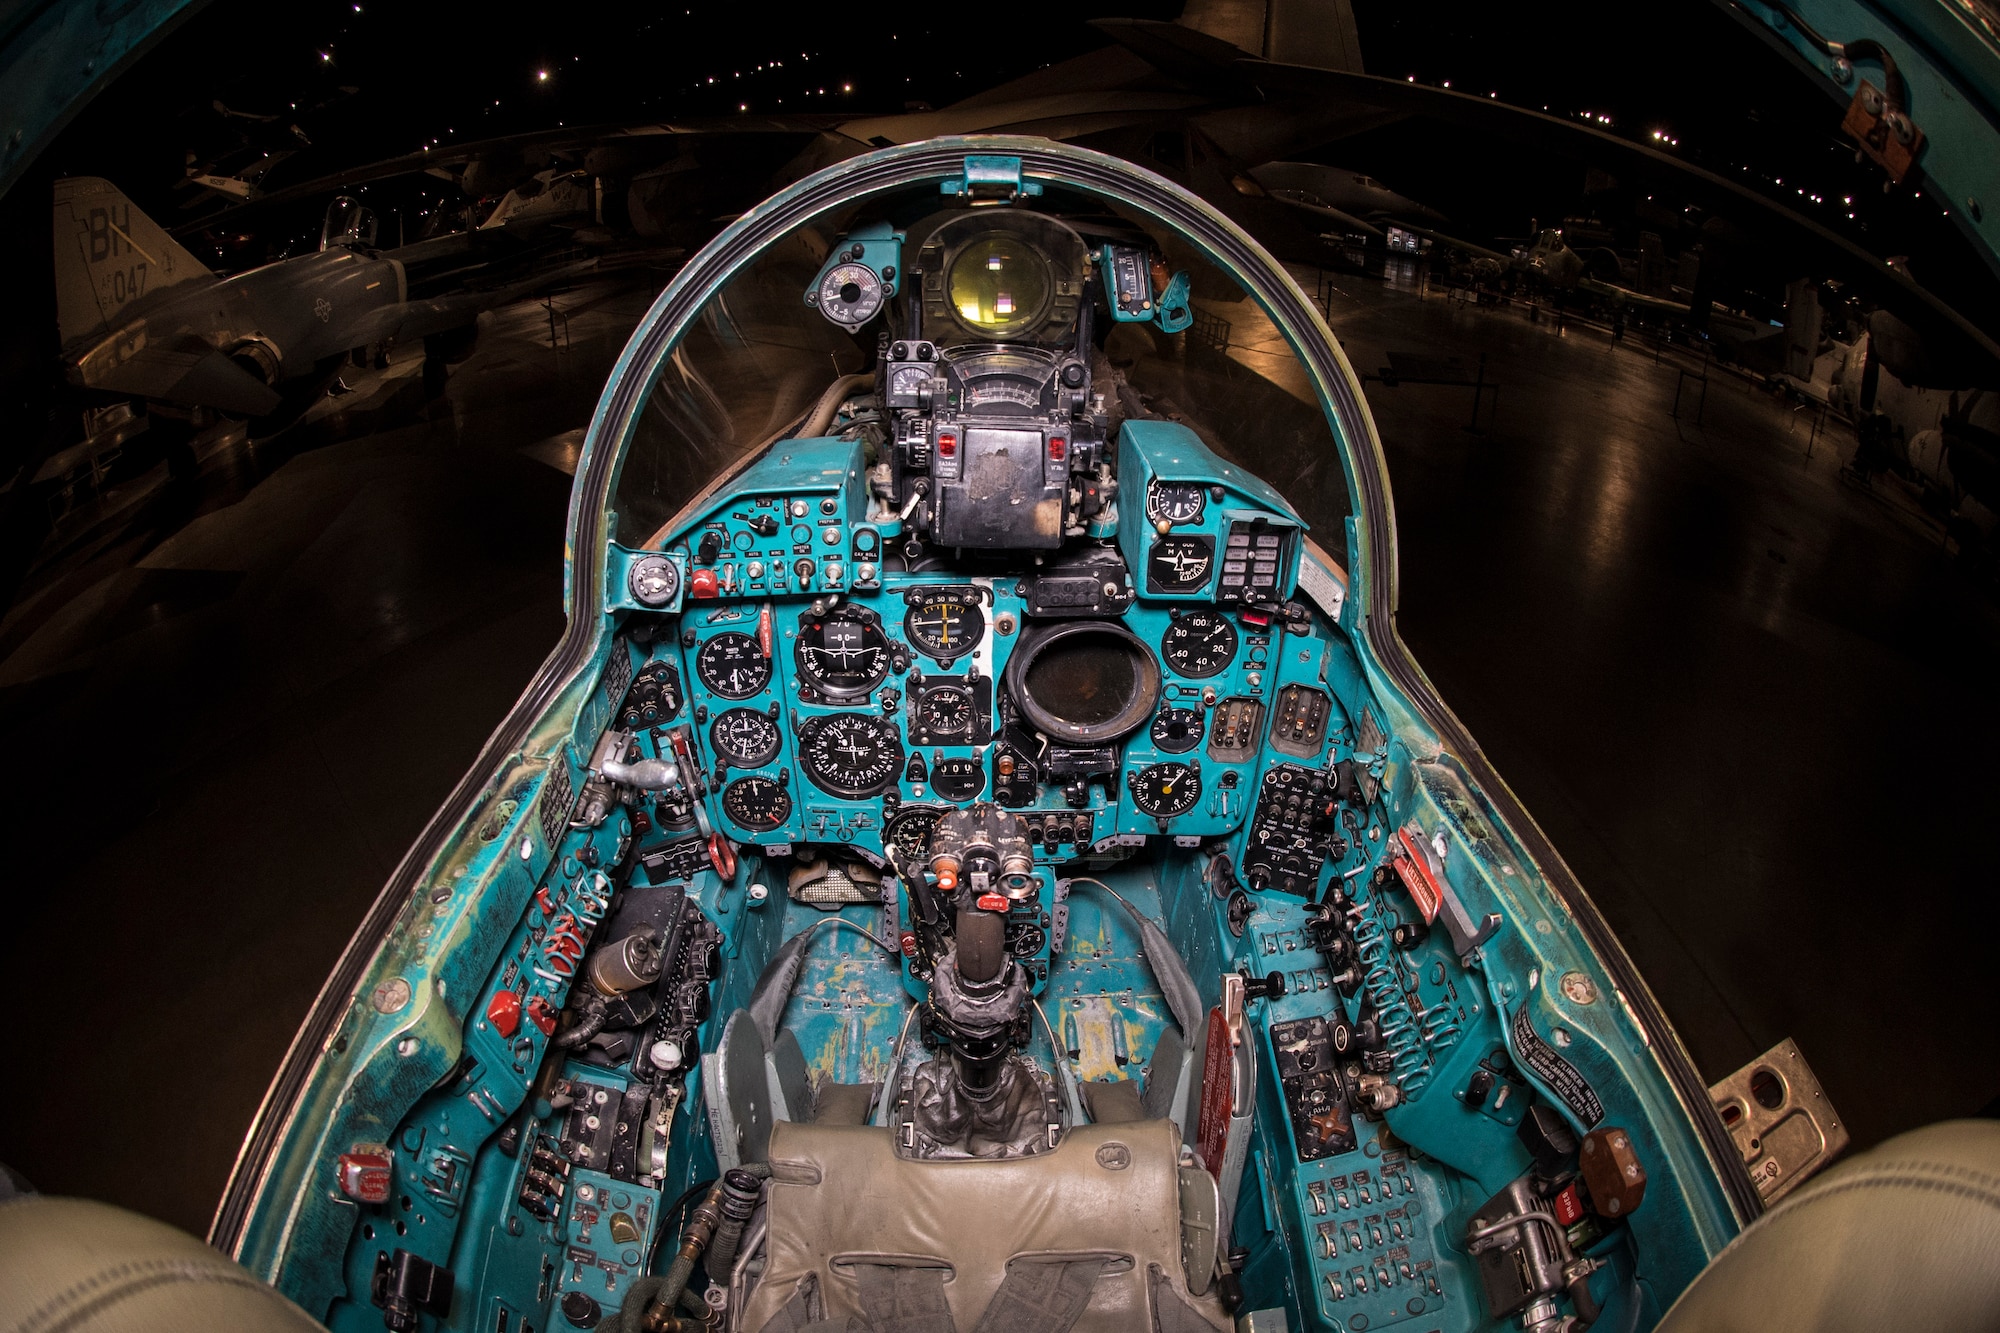 DAYTON, Ohio -- The Mikoyan-Gurevich MiG-23MS “Flogger-E” cockpit view in the museum's Cold War Gallery. (U.S. Air Force photo by Ken LaRock) 